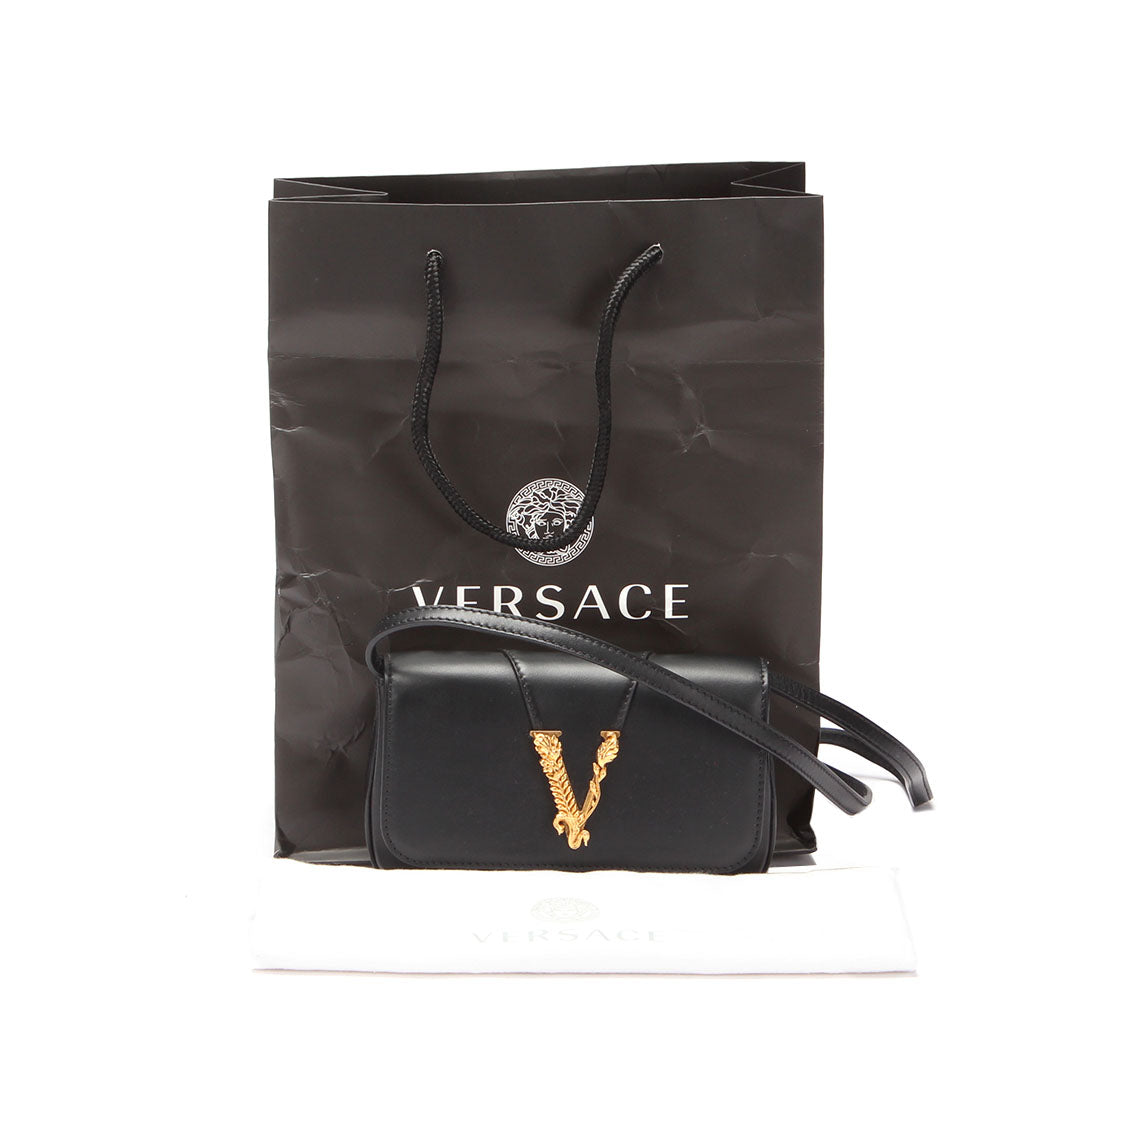 VERSACE: Virtus bag in quilted leather - Black  Versace crossbody bags  DBFH20 9DNATR4 online at